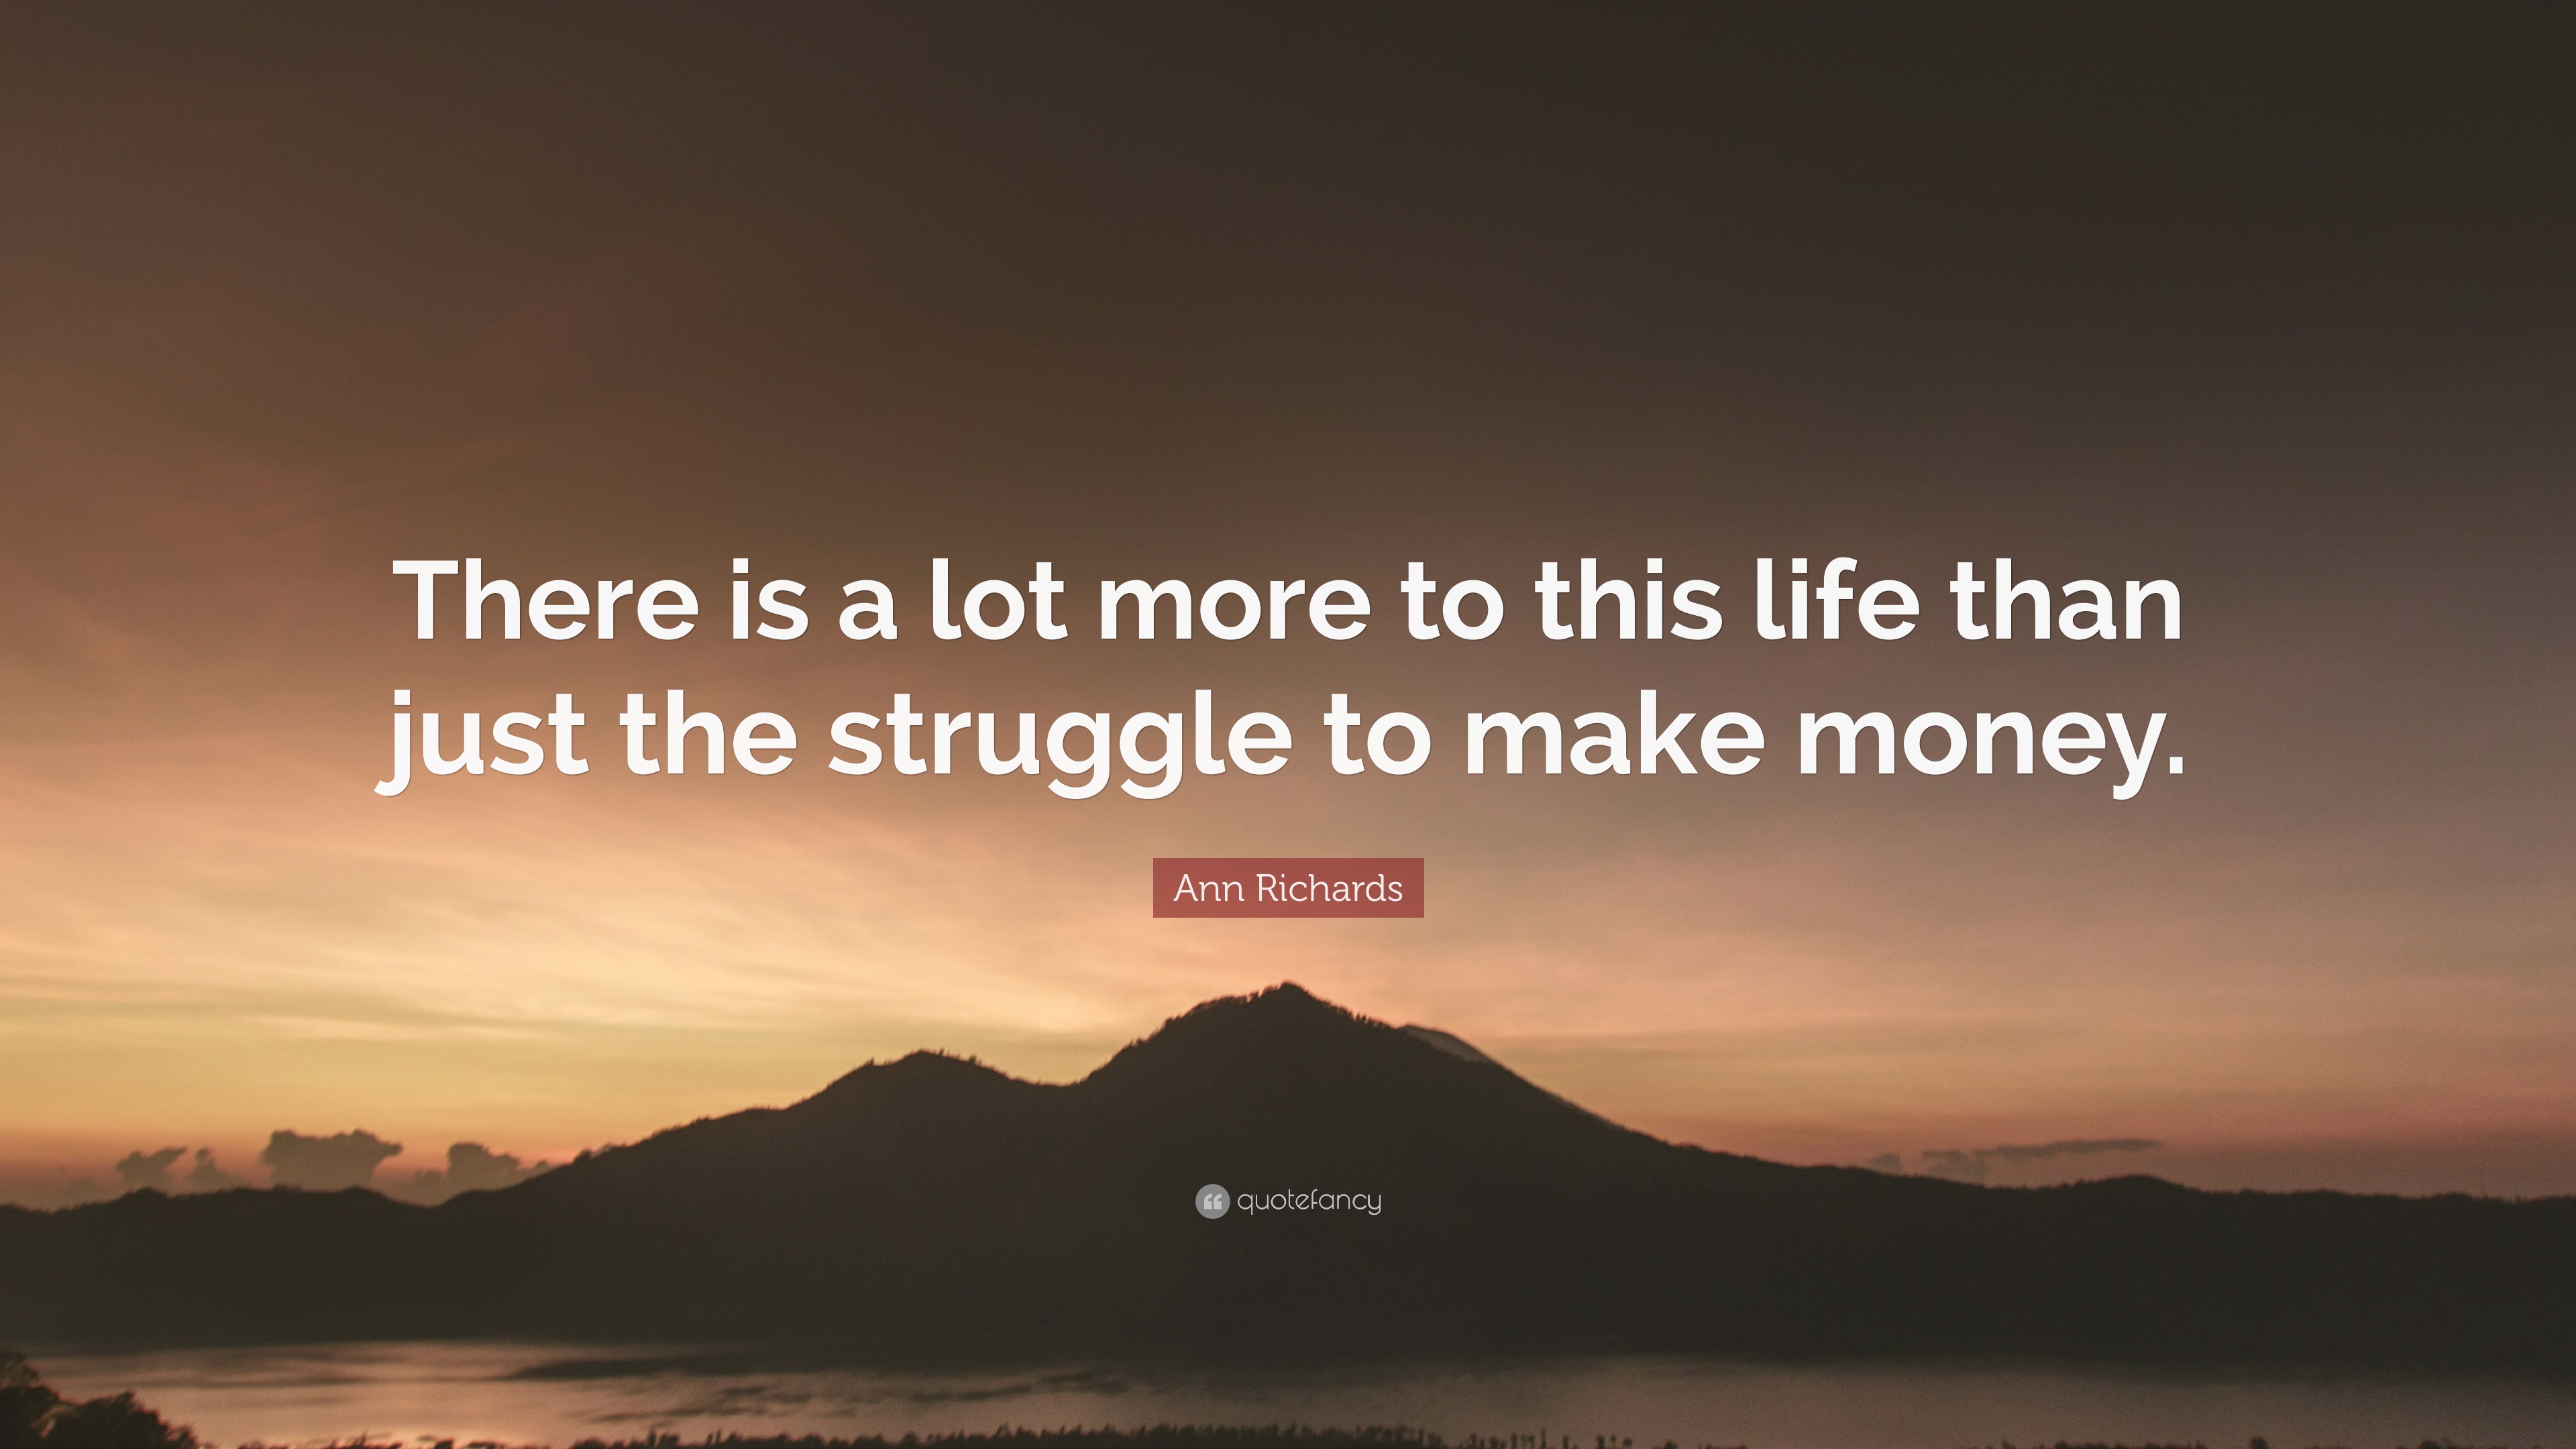 Ann Richards Quote There Is A Lot More To This Life Than Just The Struggle To